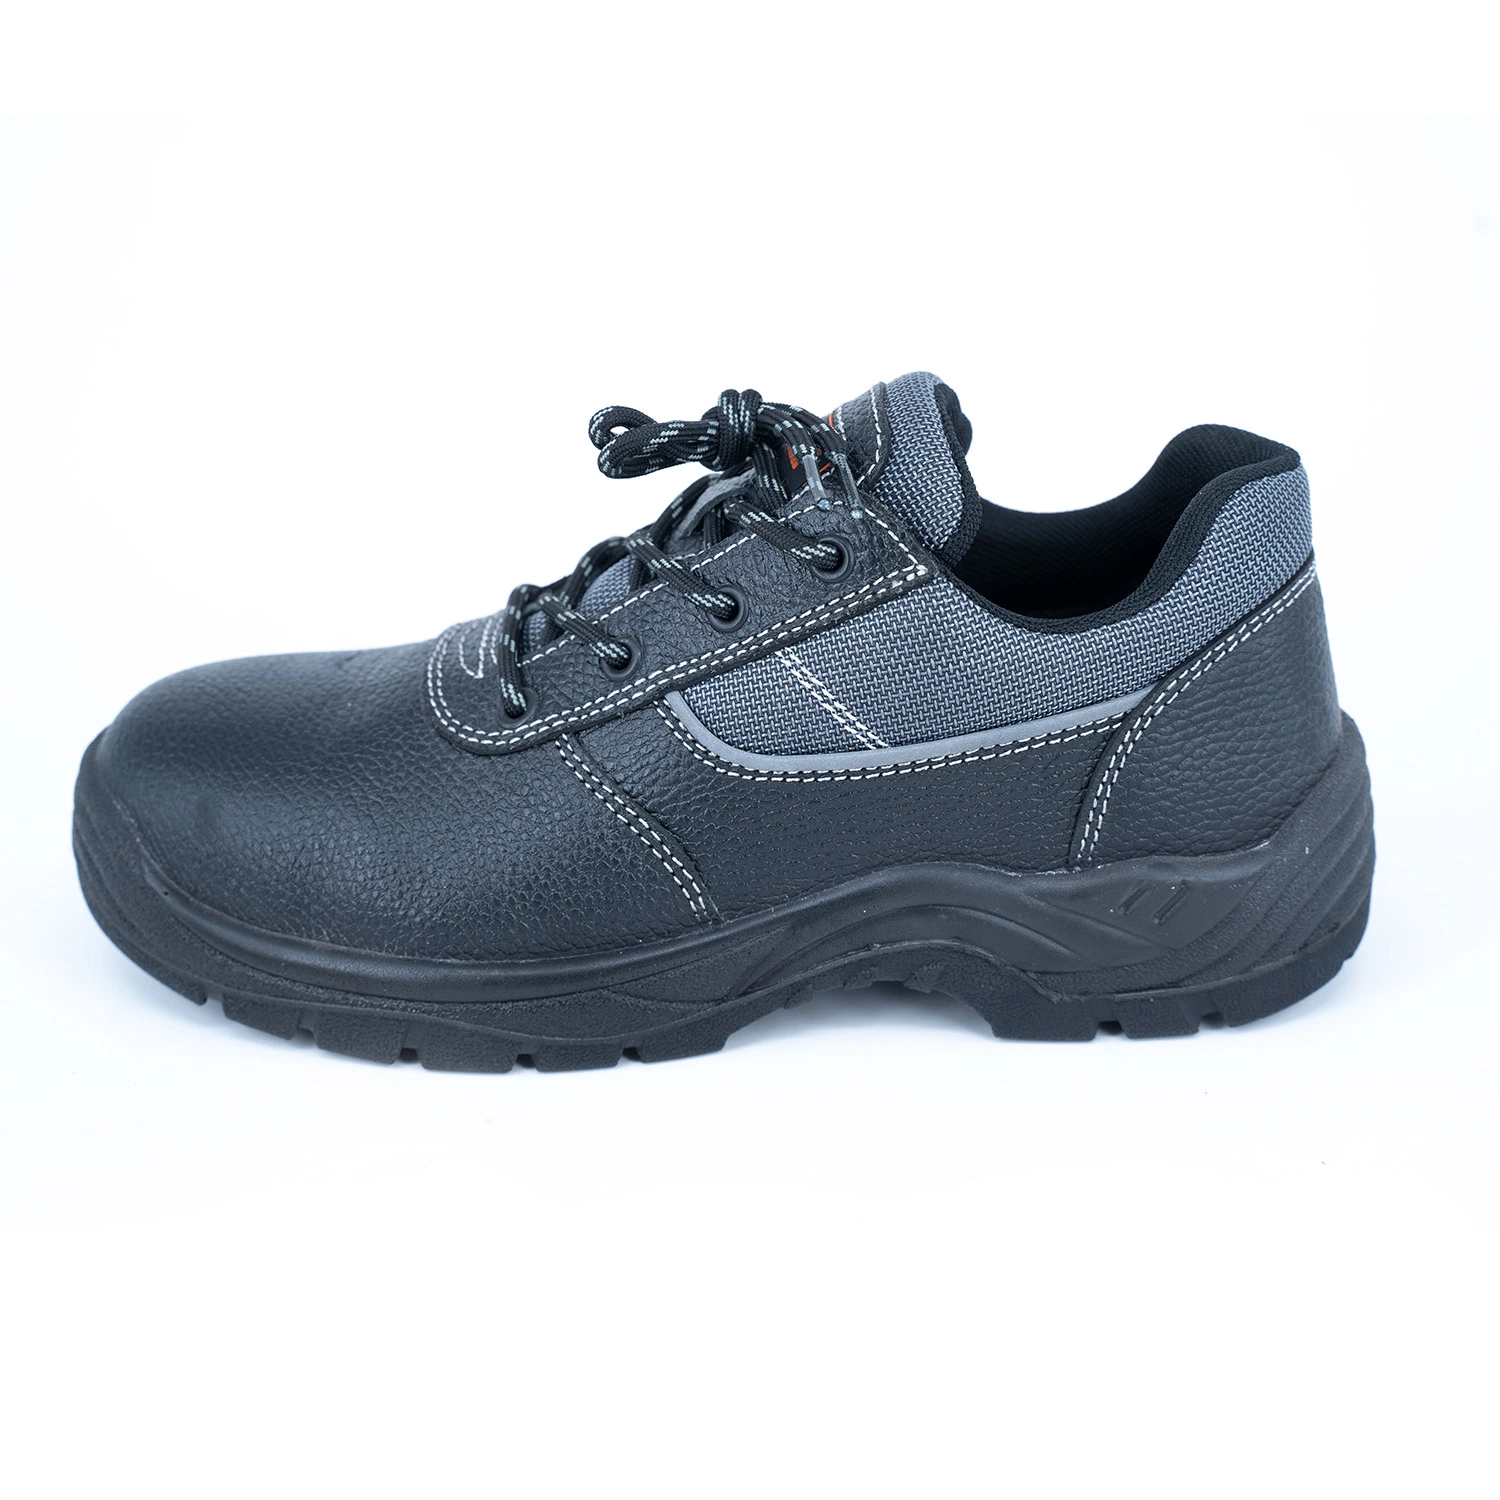 Steel Toe PU Outsole Leather Anti-Static Insole Safety Work Shoes Boots Footwear Sneakers